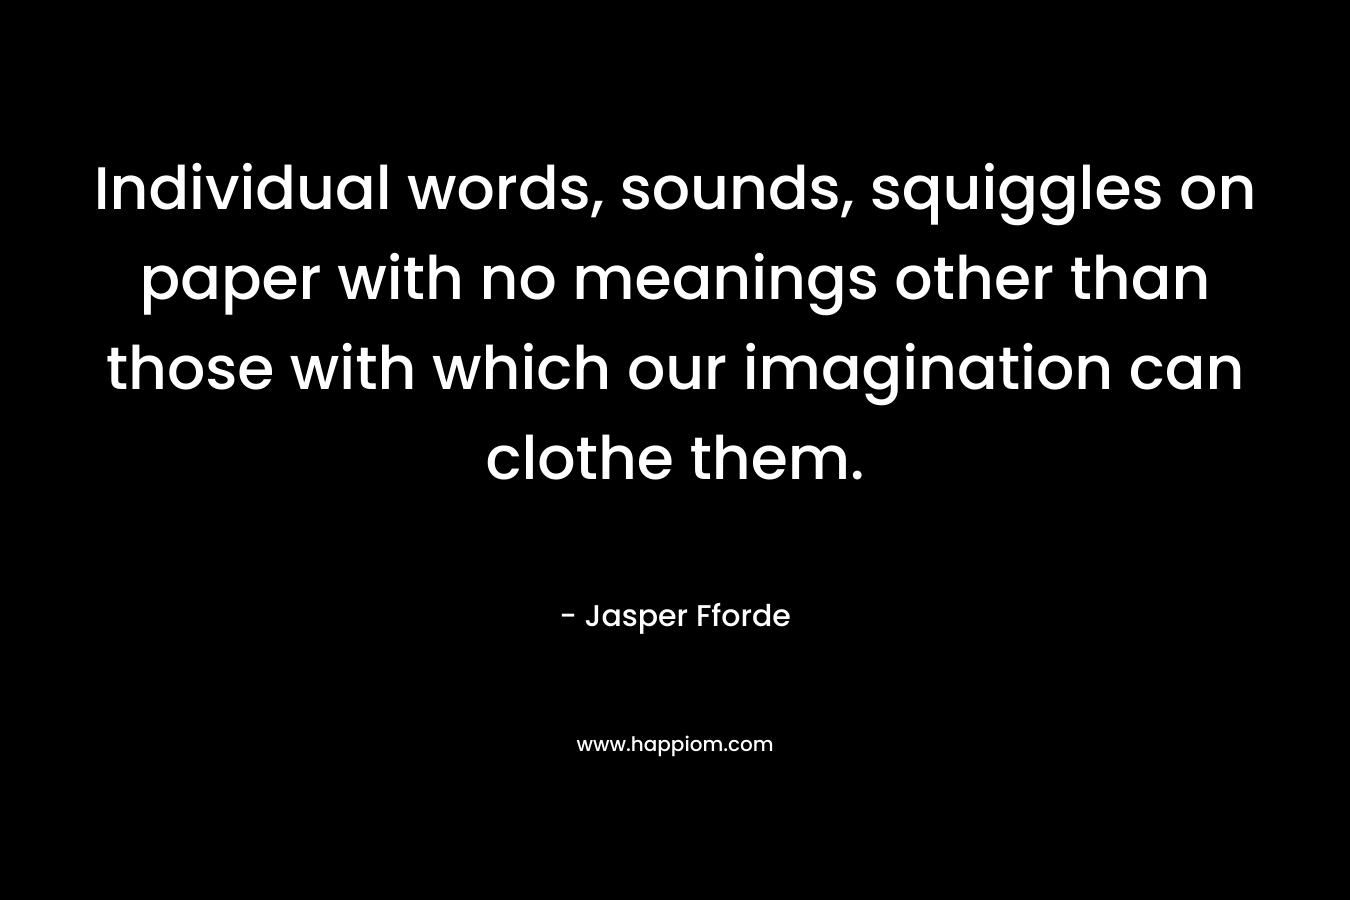 Individual words, sounds, squiggles on paper with no meanings other than those with which our imagination can clothe them. – Jasper Fforde